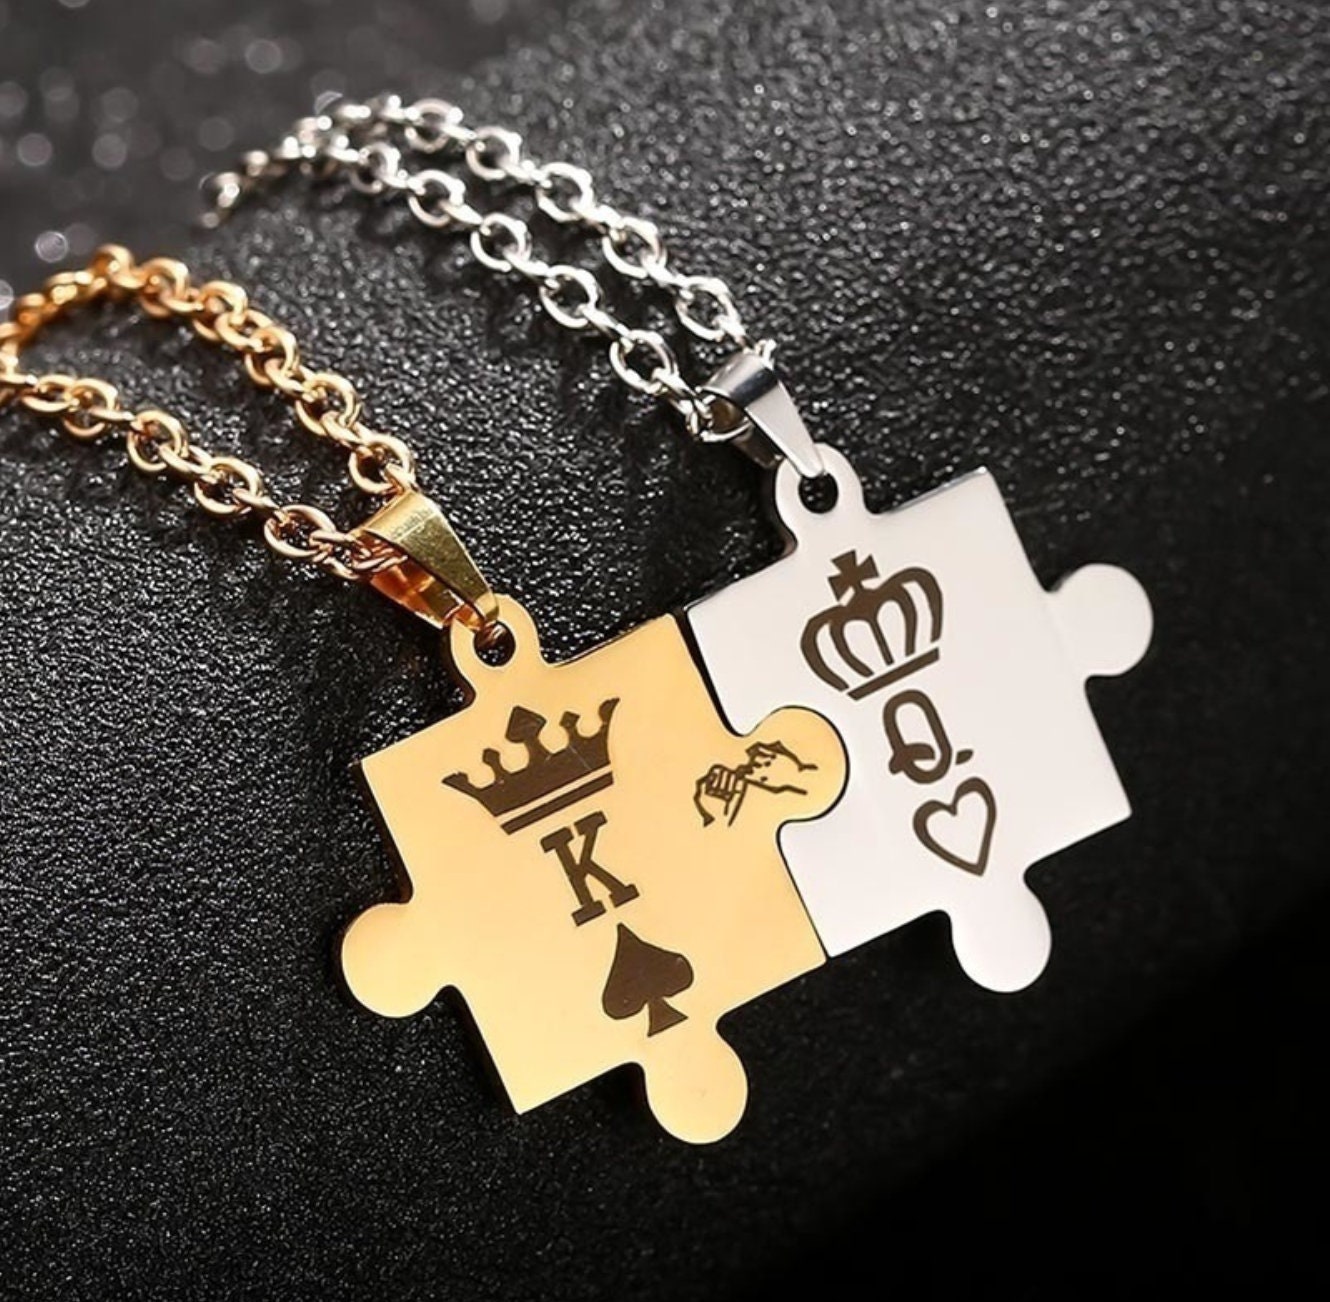 University Trendz His Queen and Her King Dual Couple Pendant/Locket for  Boys, Girls and Lovers